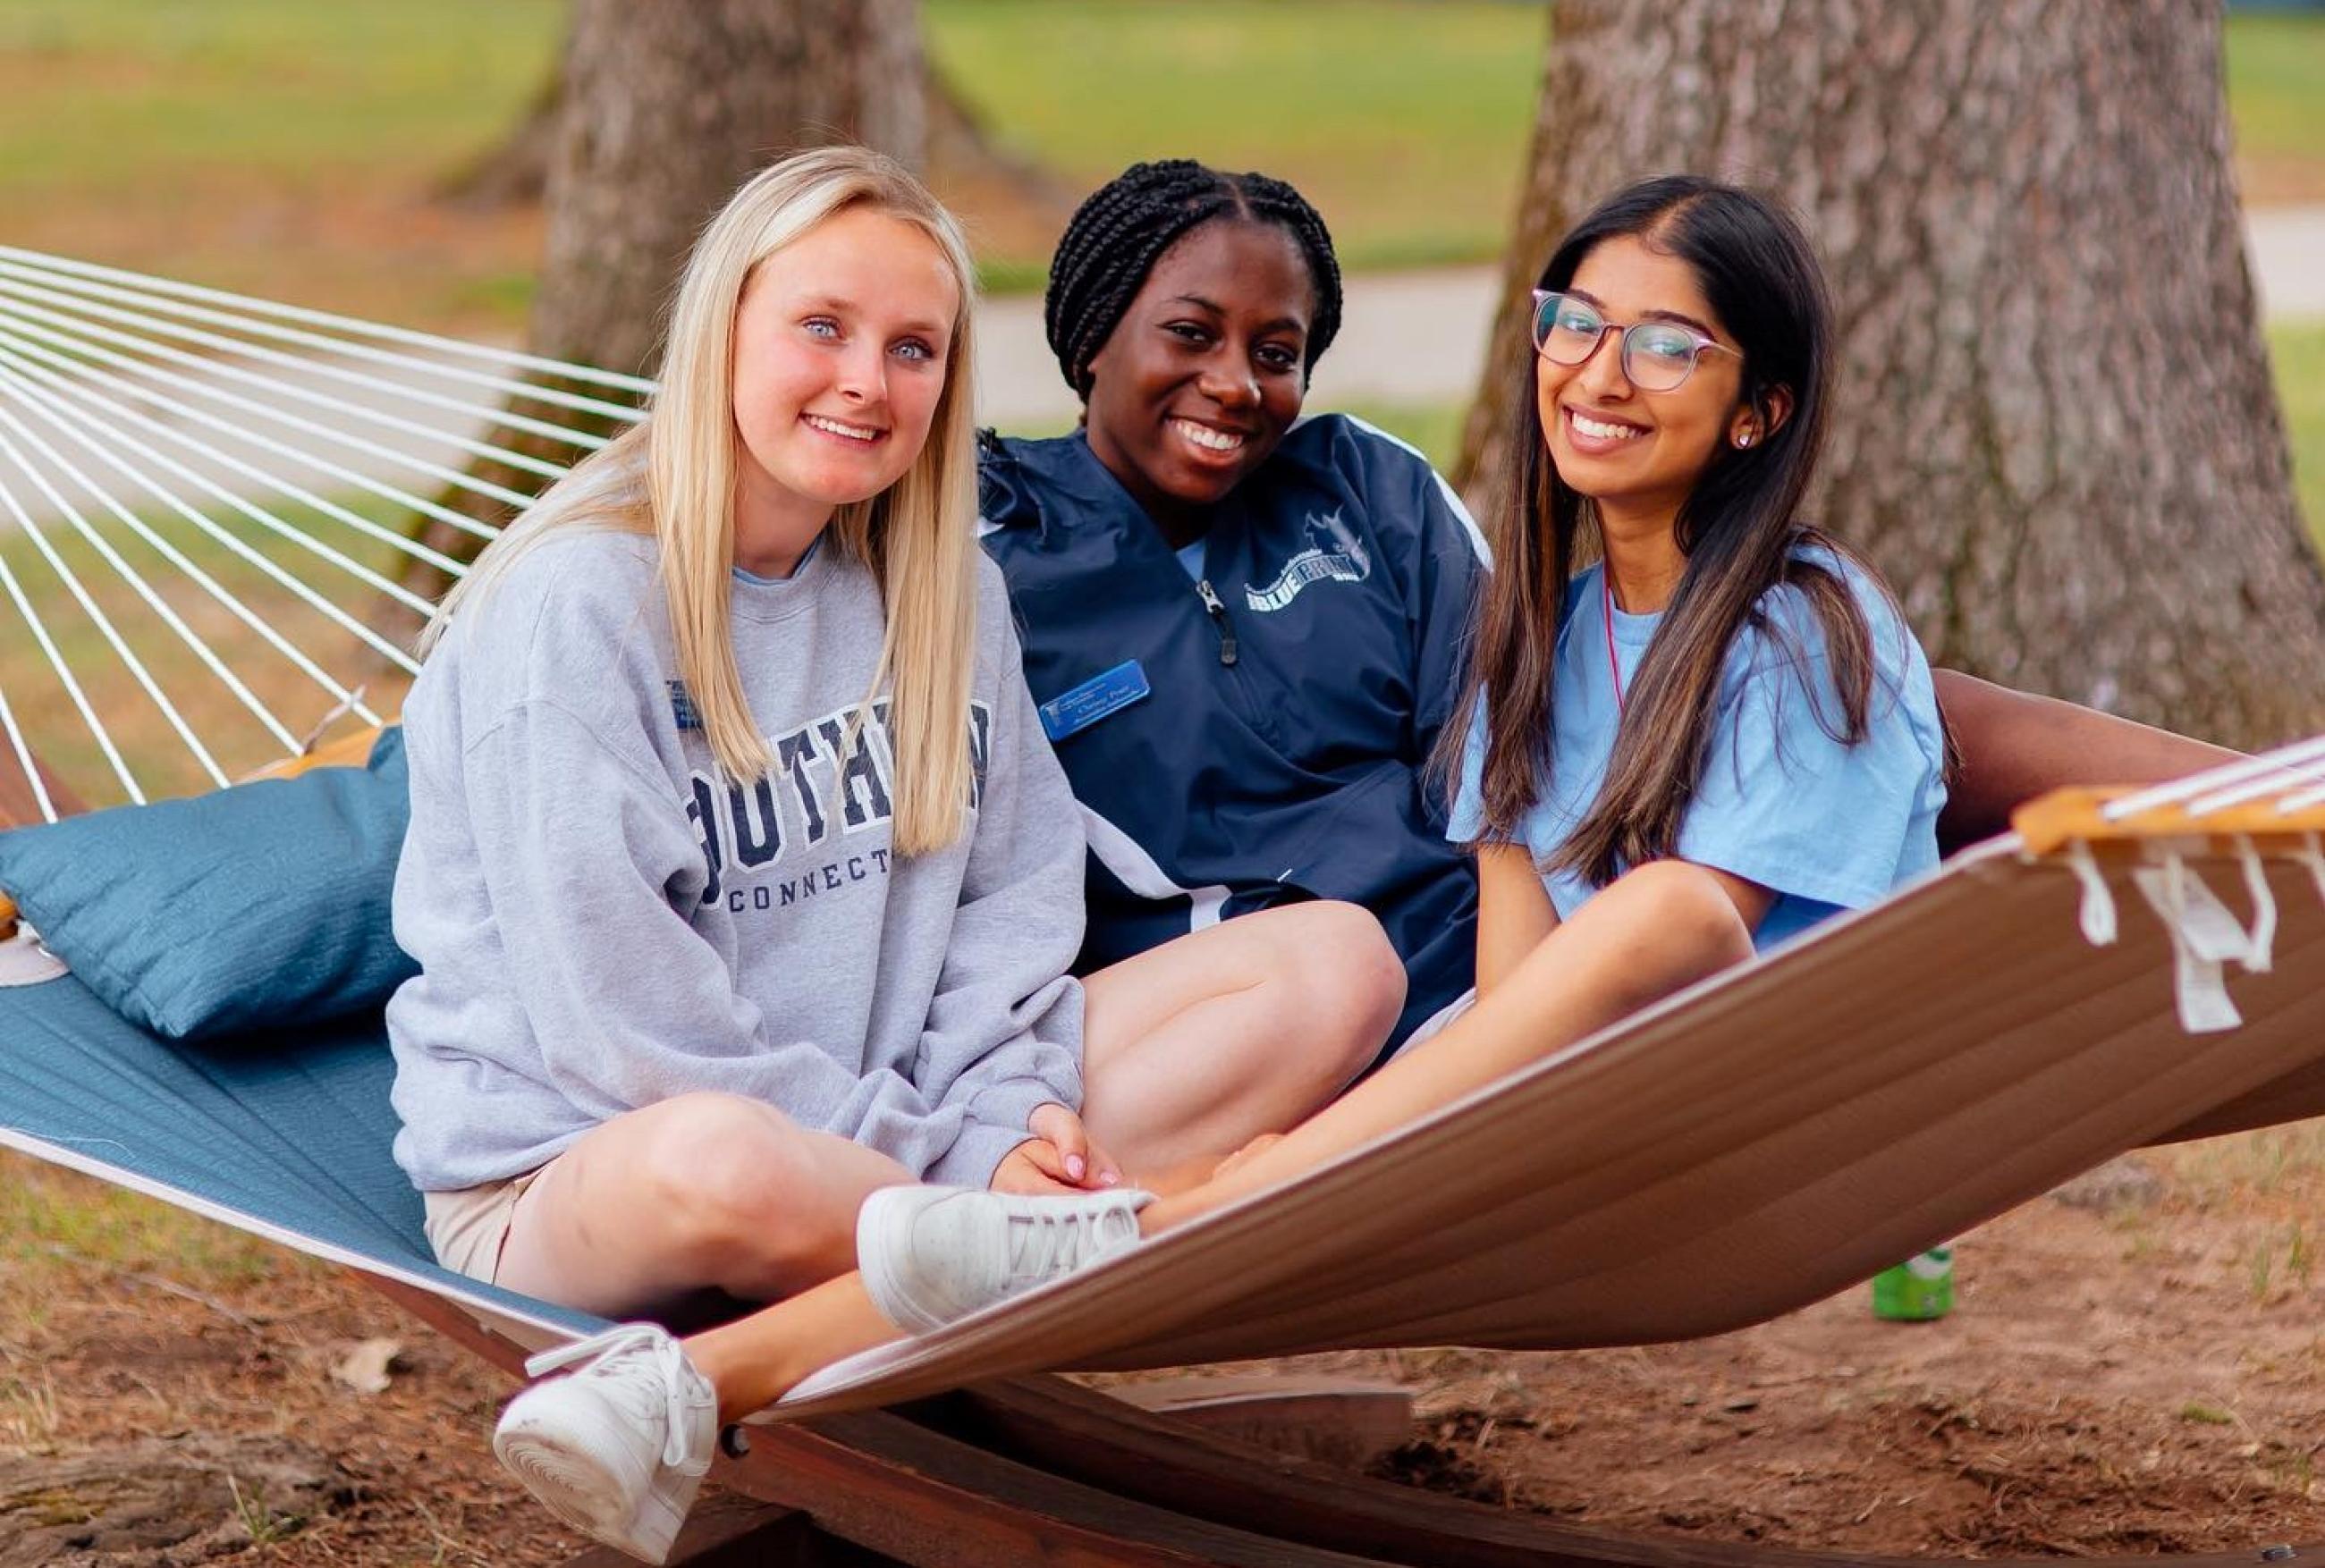 "Three students relaxing outside the residential quad"